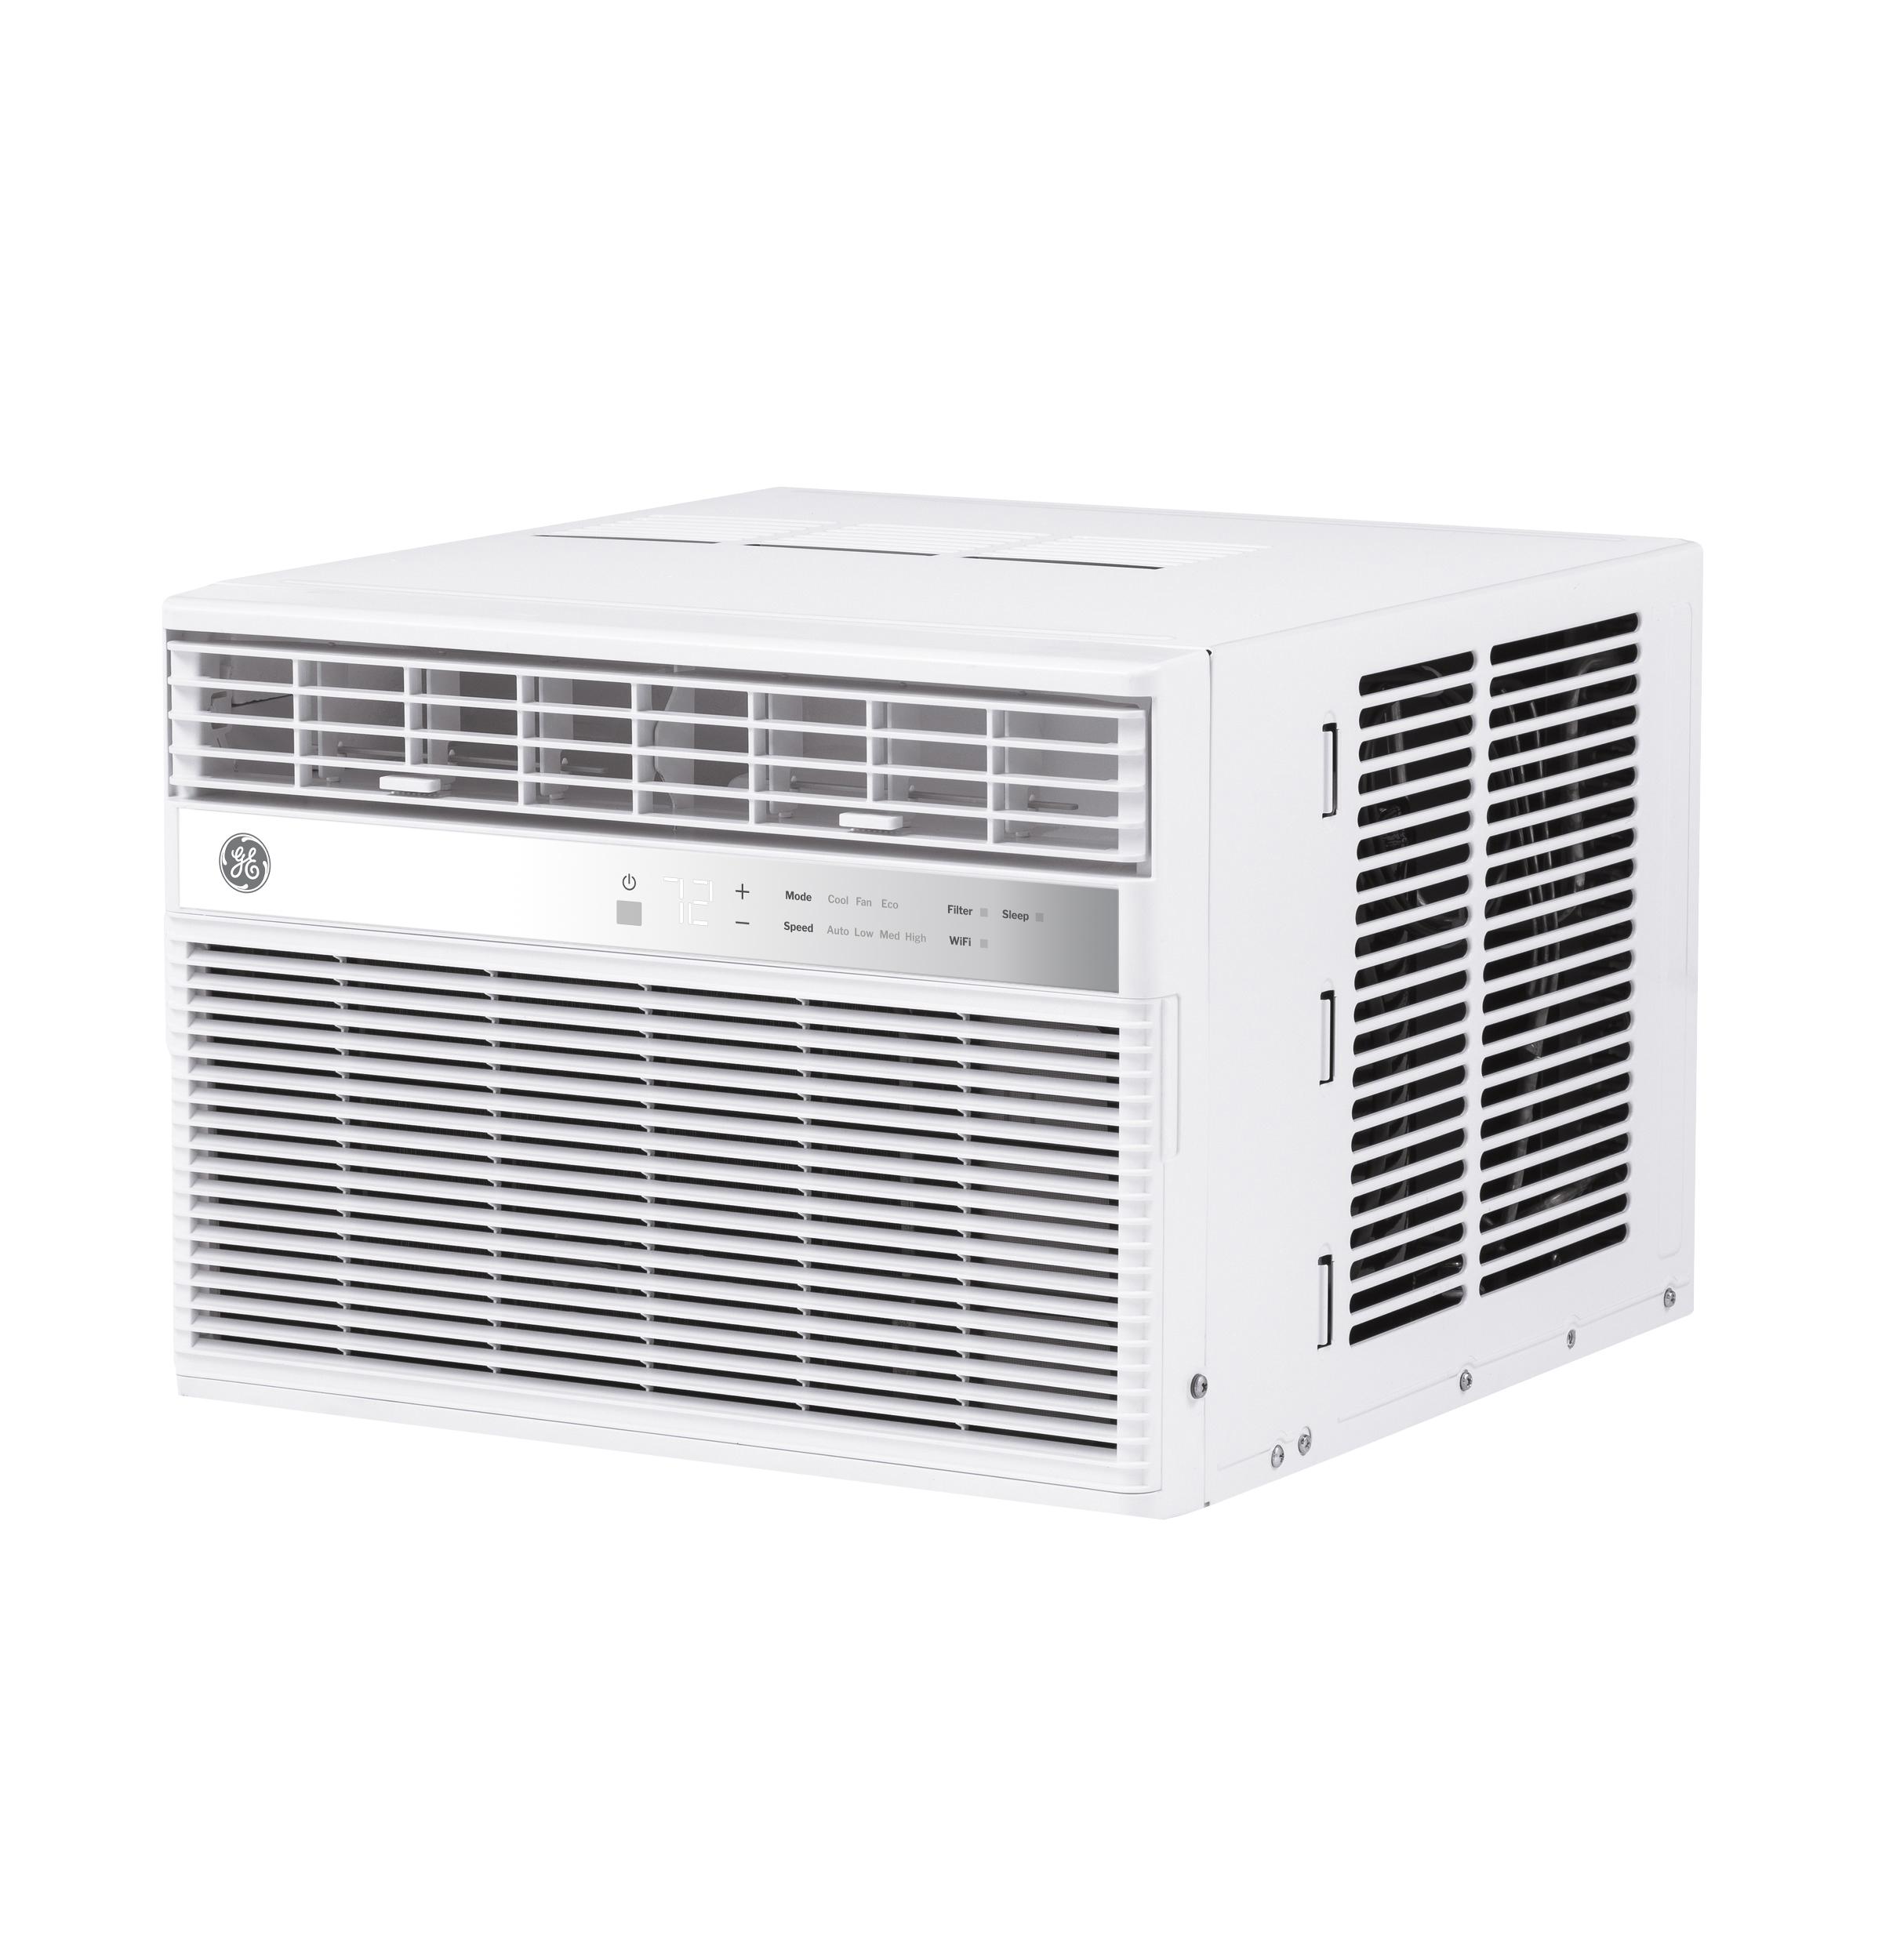 GE® 10,000 BTU Smart Electronic Window Air Conditioner for Medium Rooms up to 450 sq. ft.